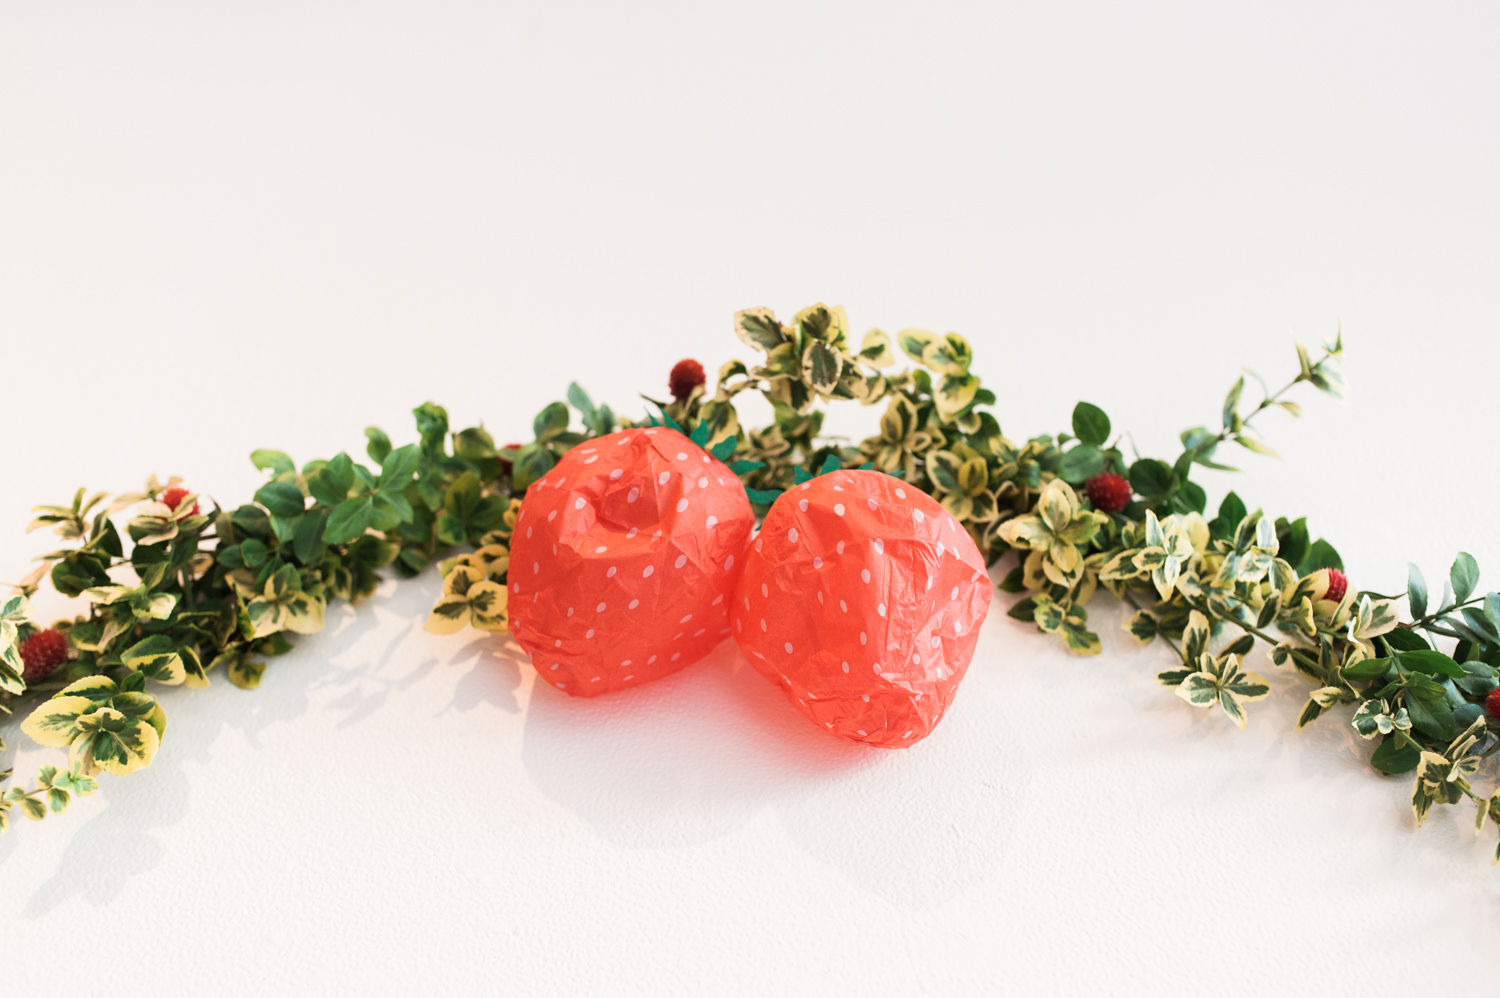 Paper strawberry wedding decorations by Ace Hotel wedding photographer Briana Morrison